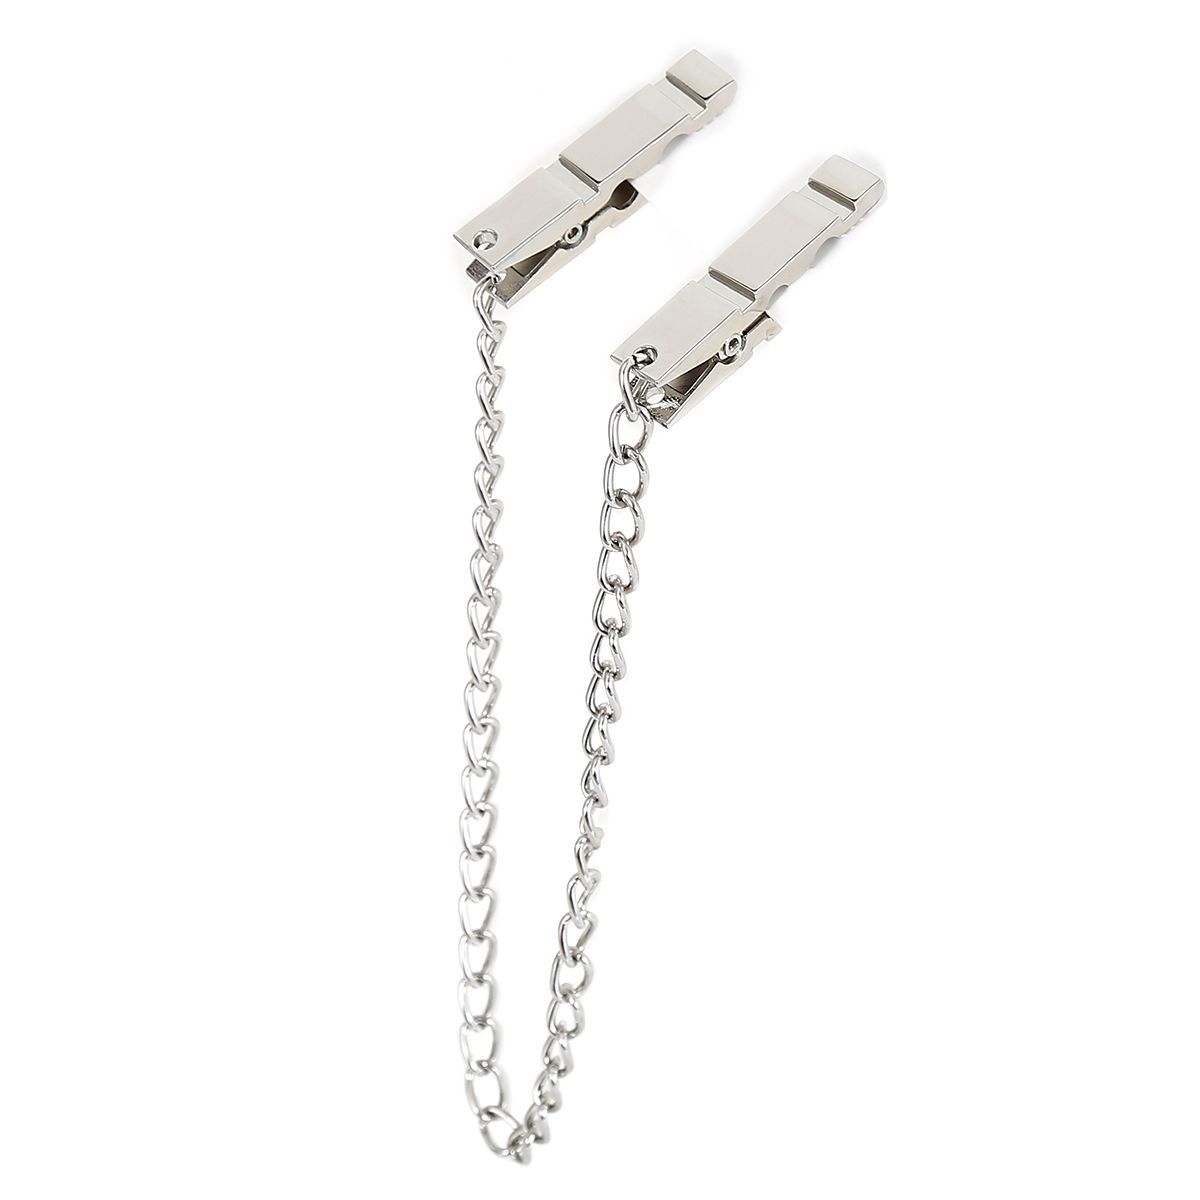 Metal clothespin nipple clamps